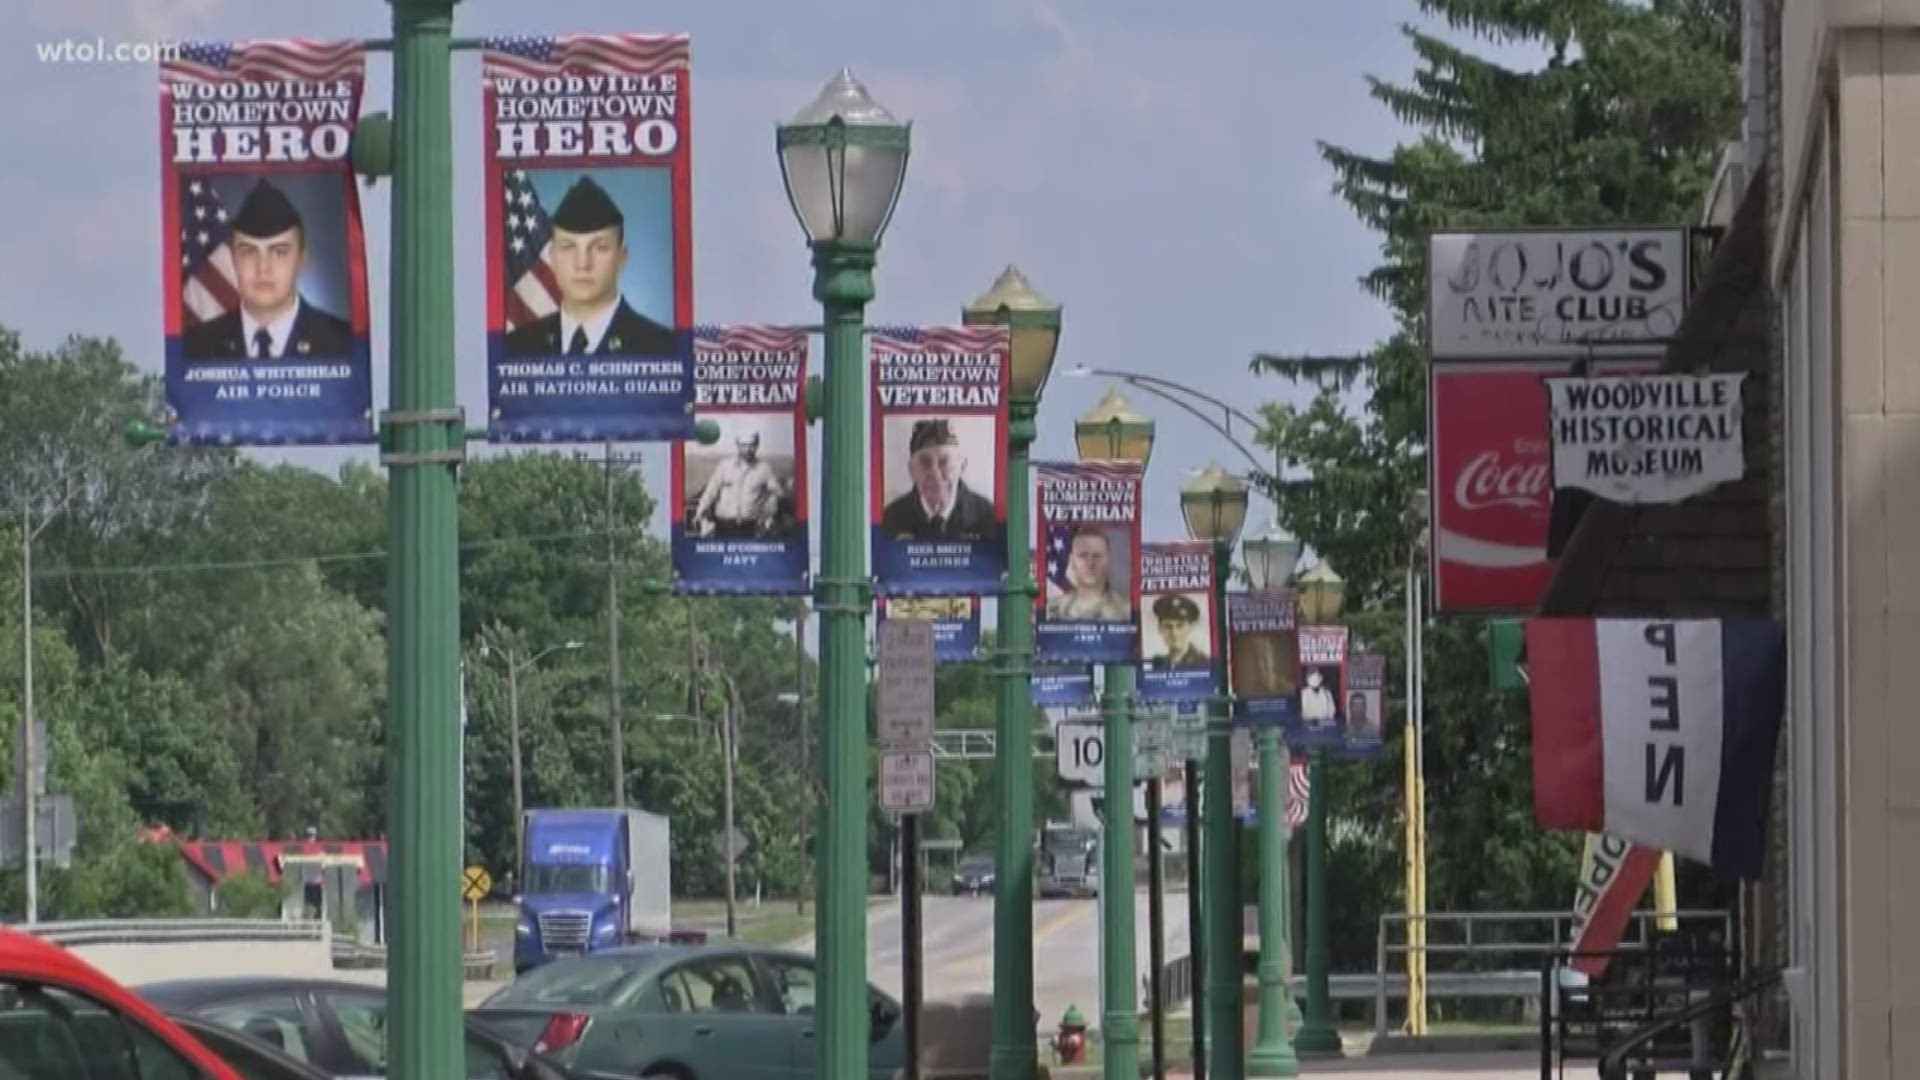 Village pays tribute to 'Hometown Heroes' on light posts up and down Main Street. There are 102 banners up to honor veterans.